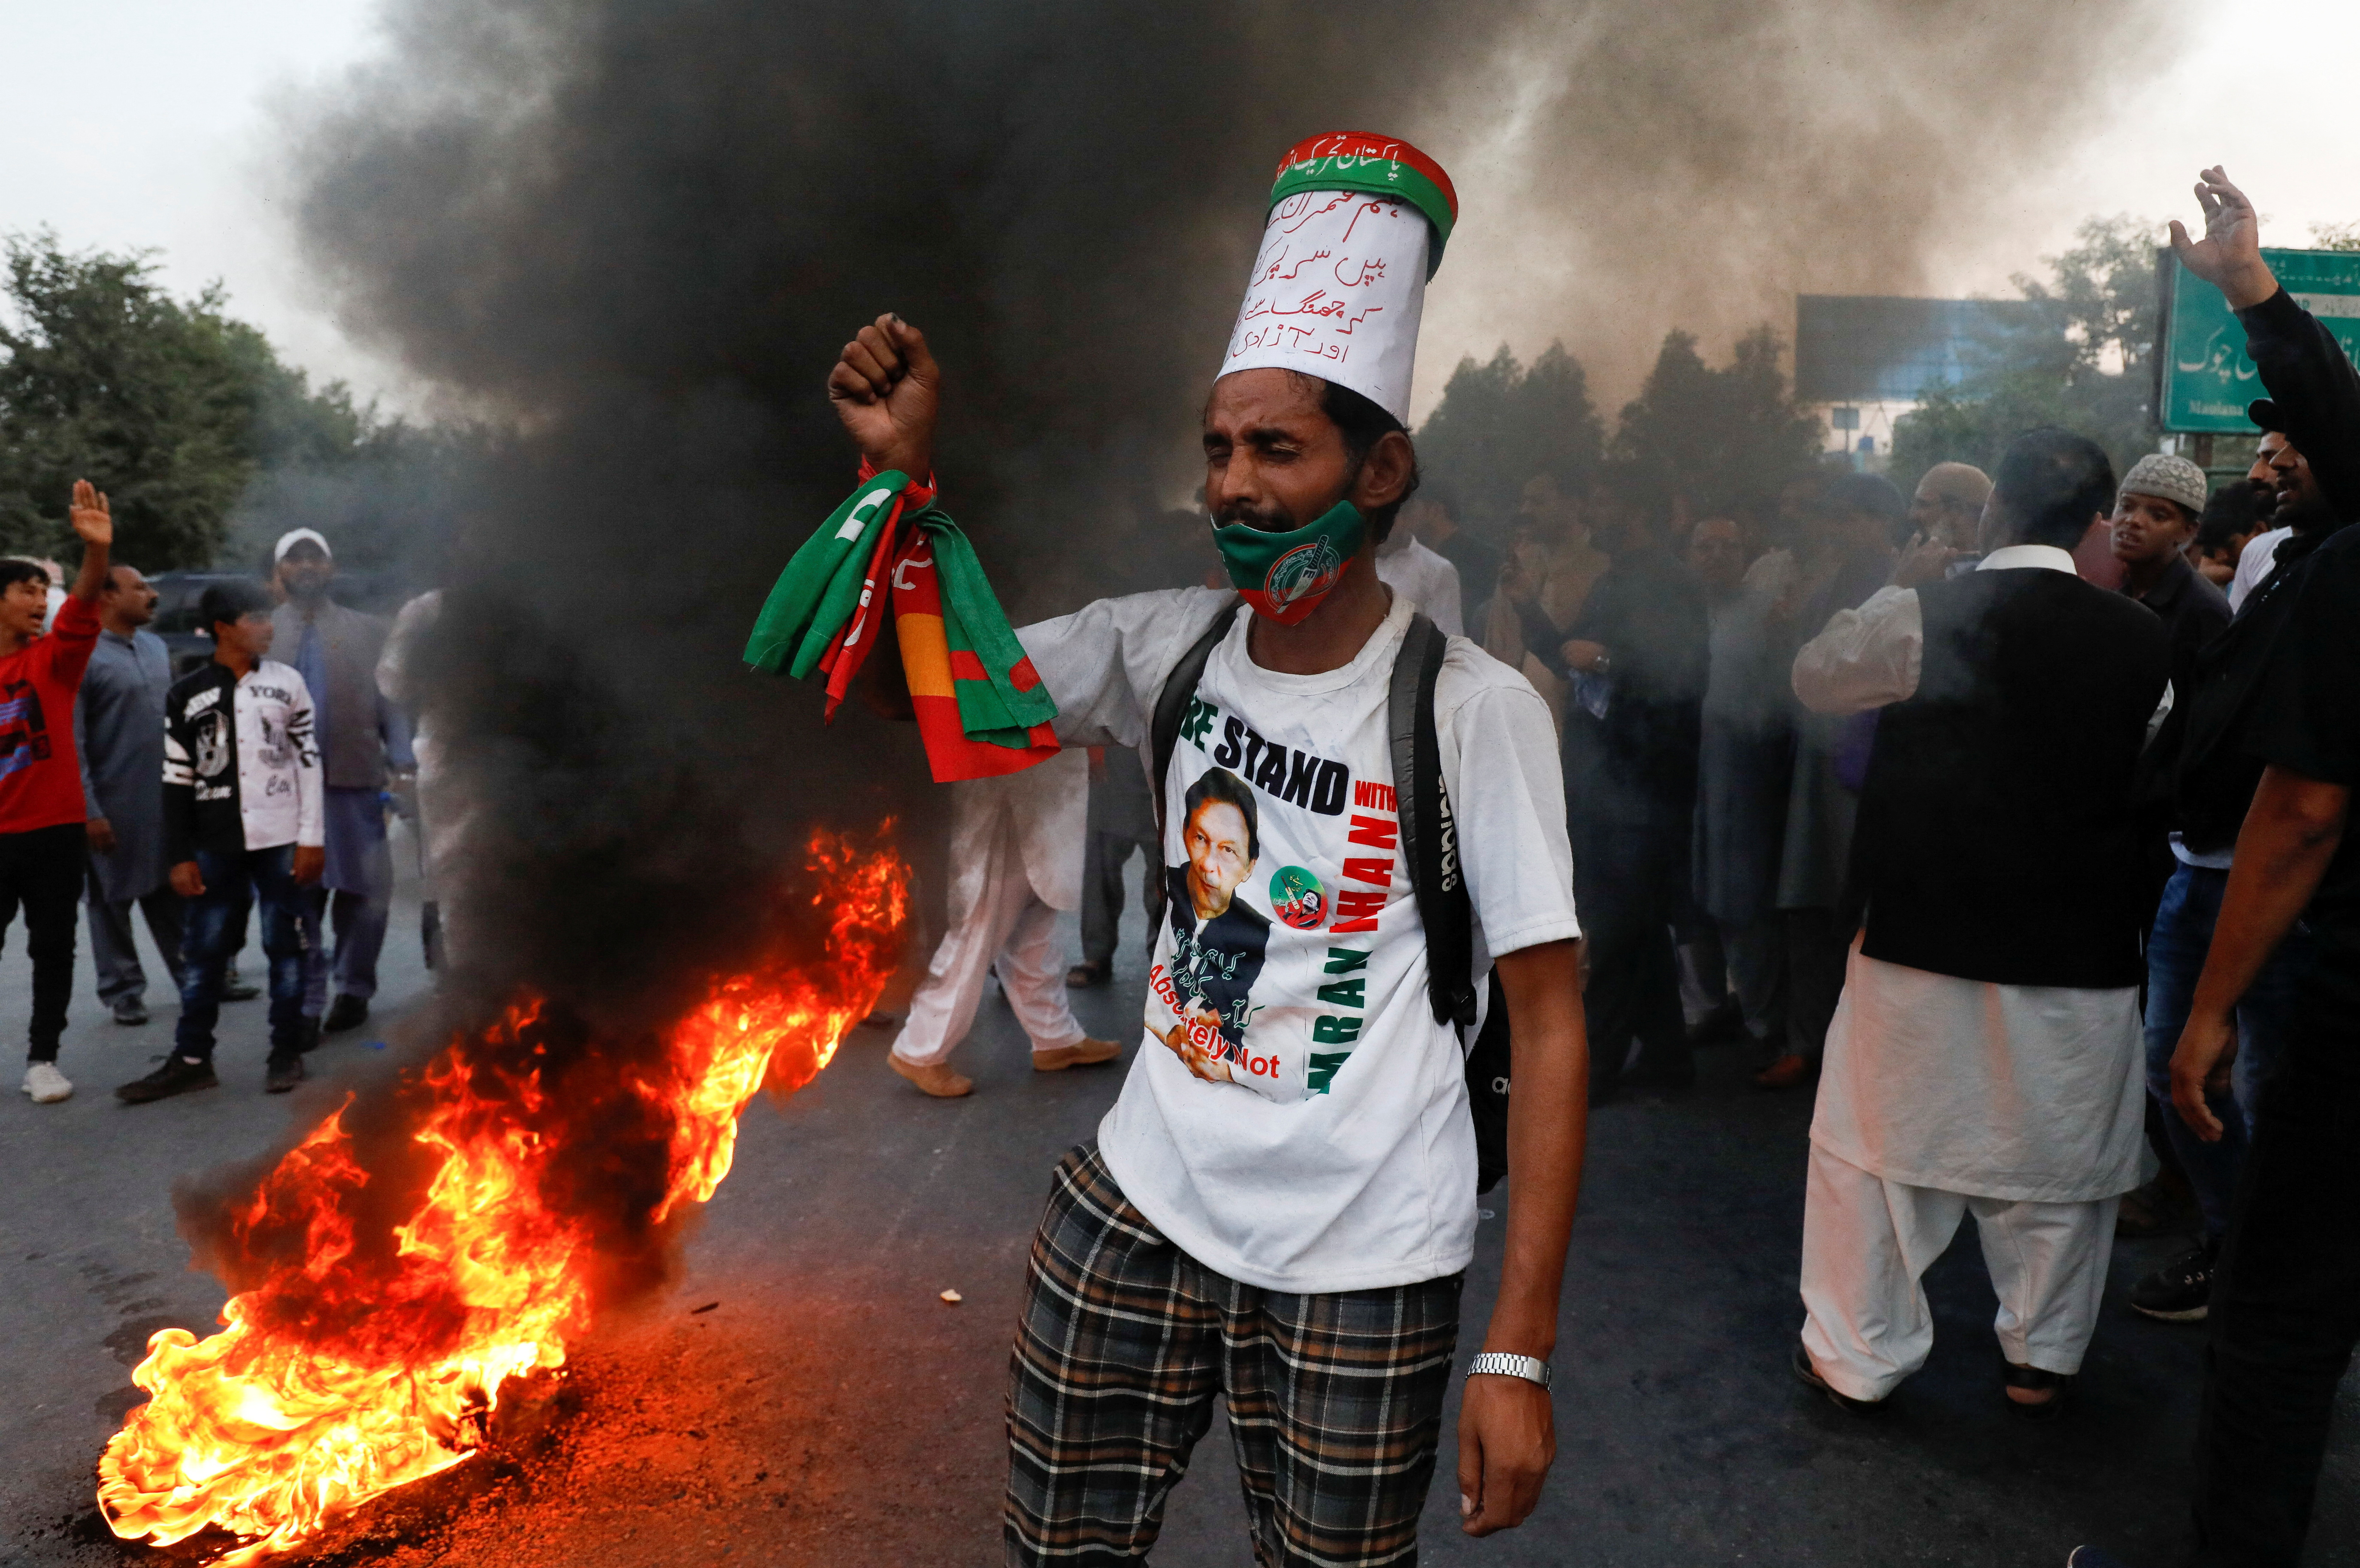 People protest following the shooting incident on a long march held by Pakistan's former Prime Minister Imran Khan, in Wazirabad